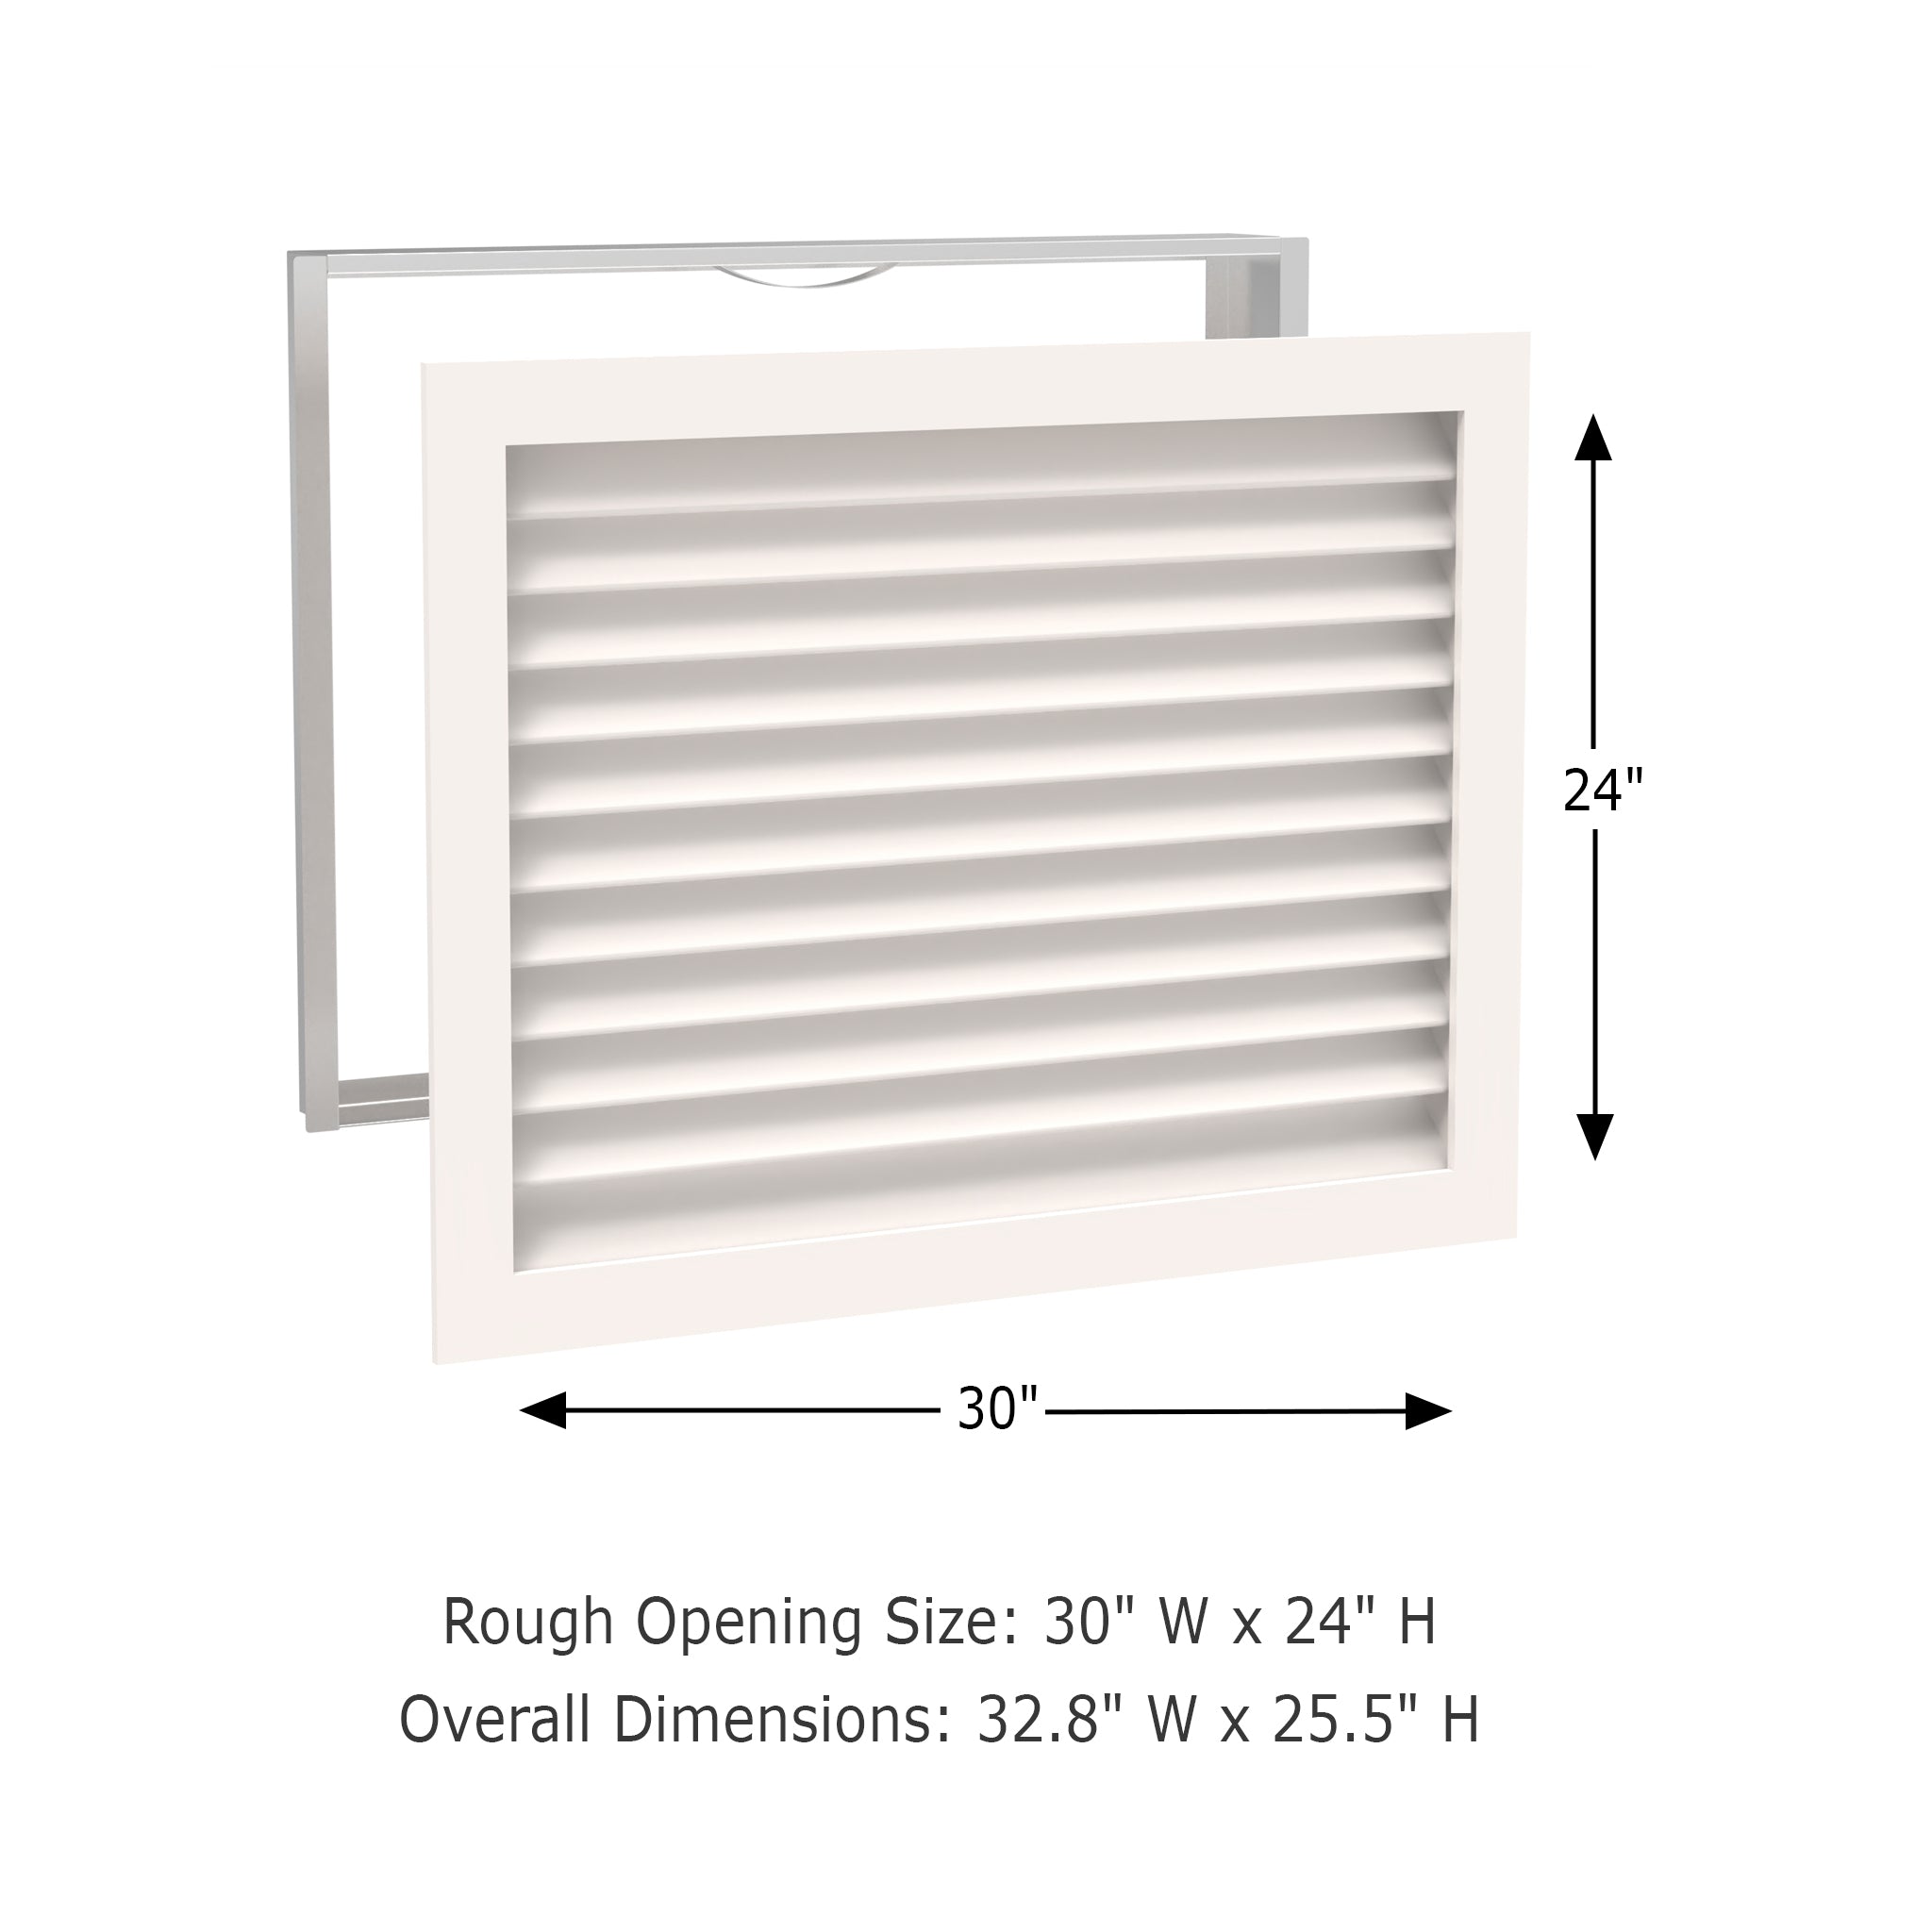 Worth Home Products - decorative wood AC vent covers luxury return vent - Primed Wood Louvers 30x24